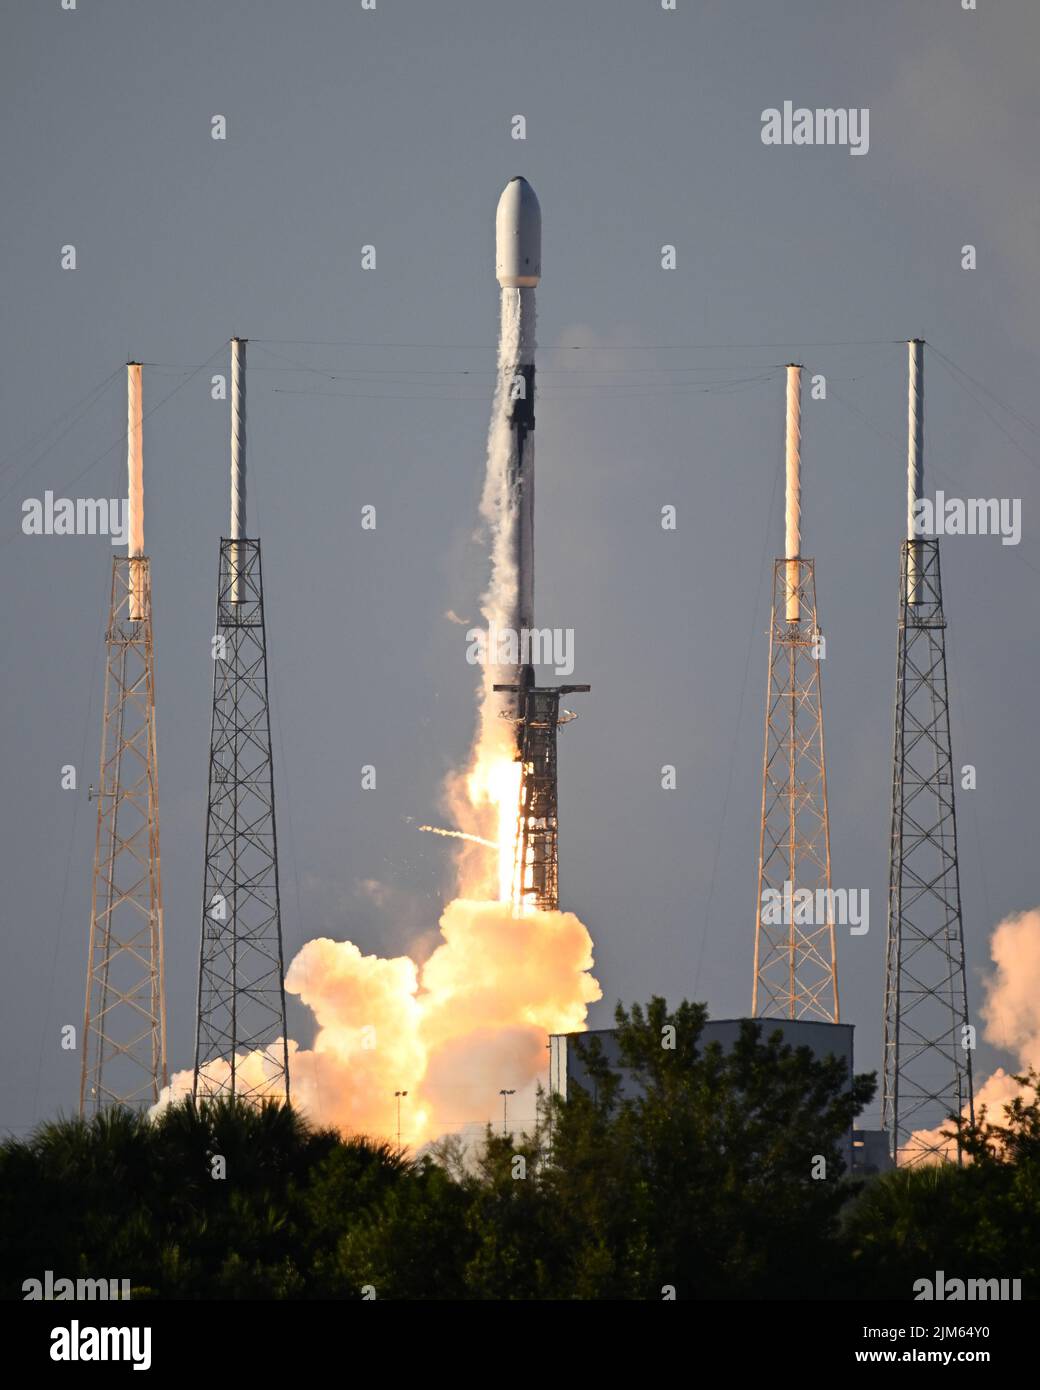 A SpaceX Falcon 9 rocket launches the Korea Pathfinder Lunar Orbiter (KPLO) from Complex 40 at 7:08 PM from the Cape Canaveral Space Force Station, Florida on Thursday August 4, 2022. South Korea's mission will search for potential areas of water ice on the lunar surface. Photo by Joe Marino/UPI Credit: UPI/Alamy Live News Stock Photo